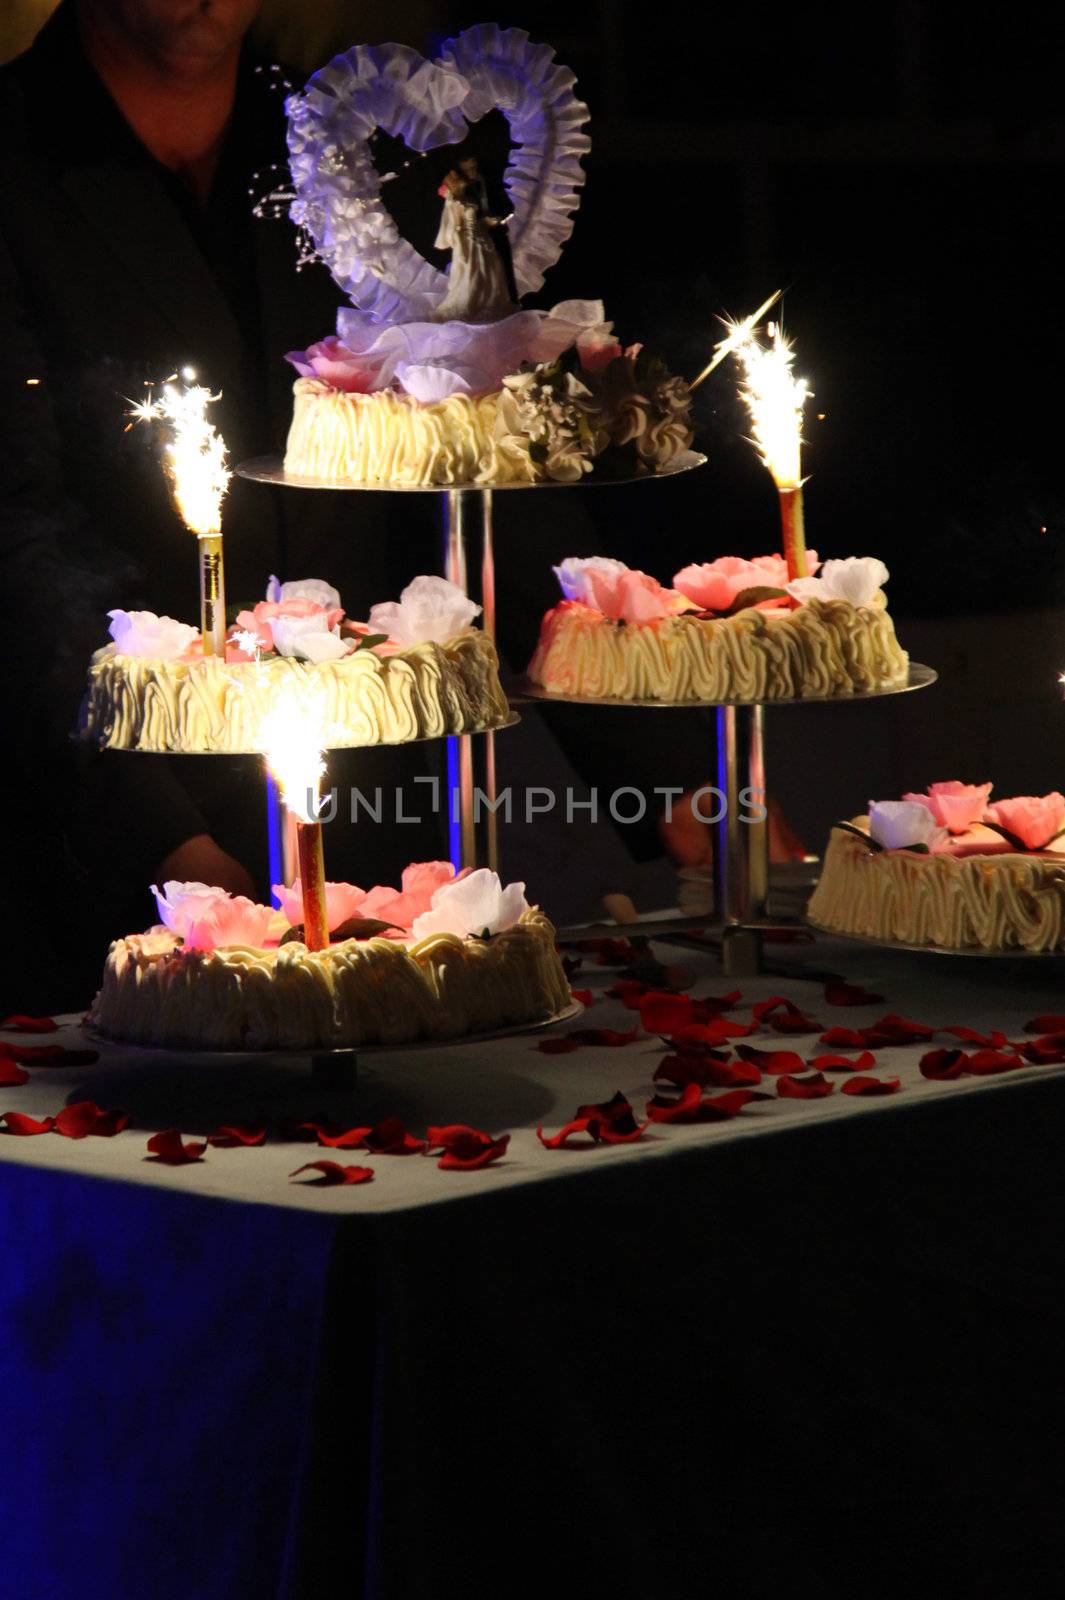 tiered wedding cake with candles and fireworks on a table
